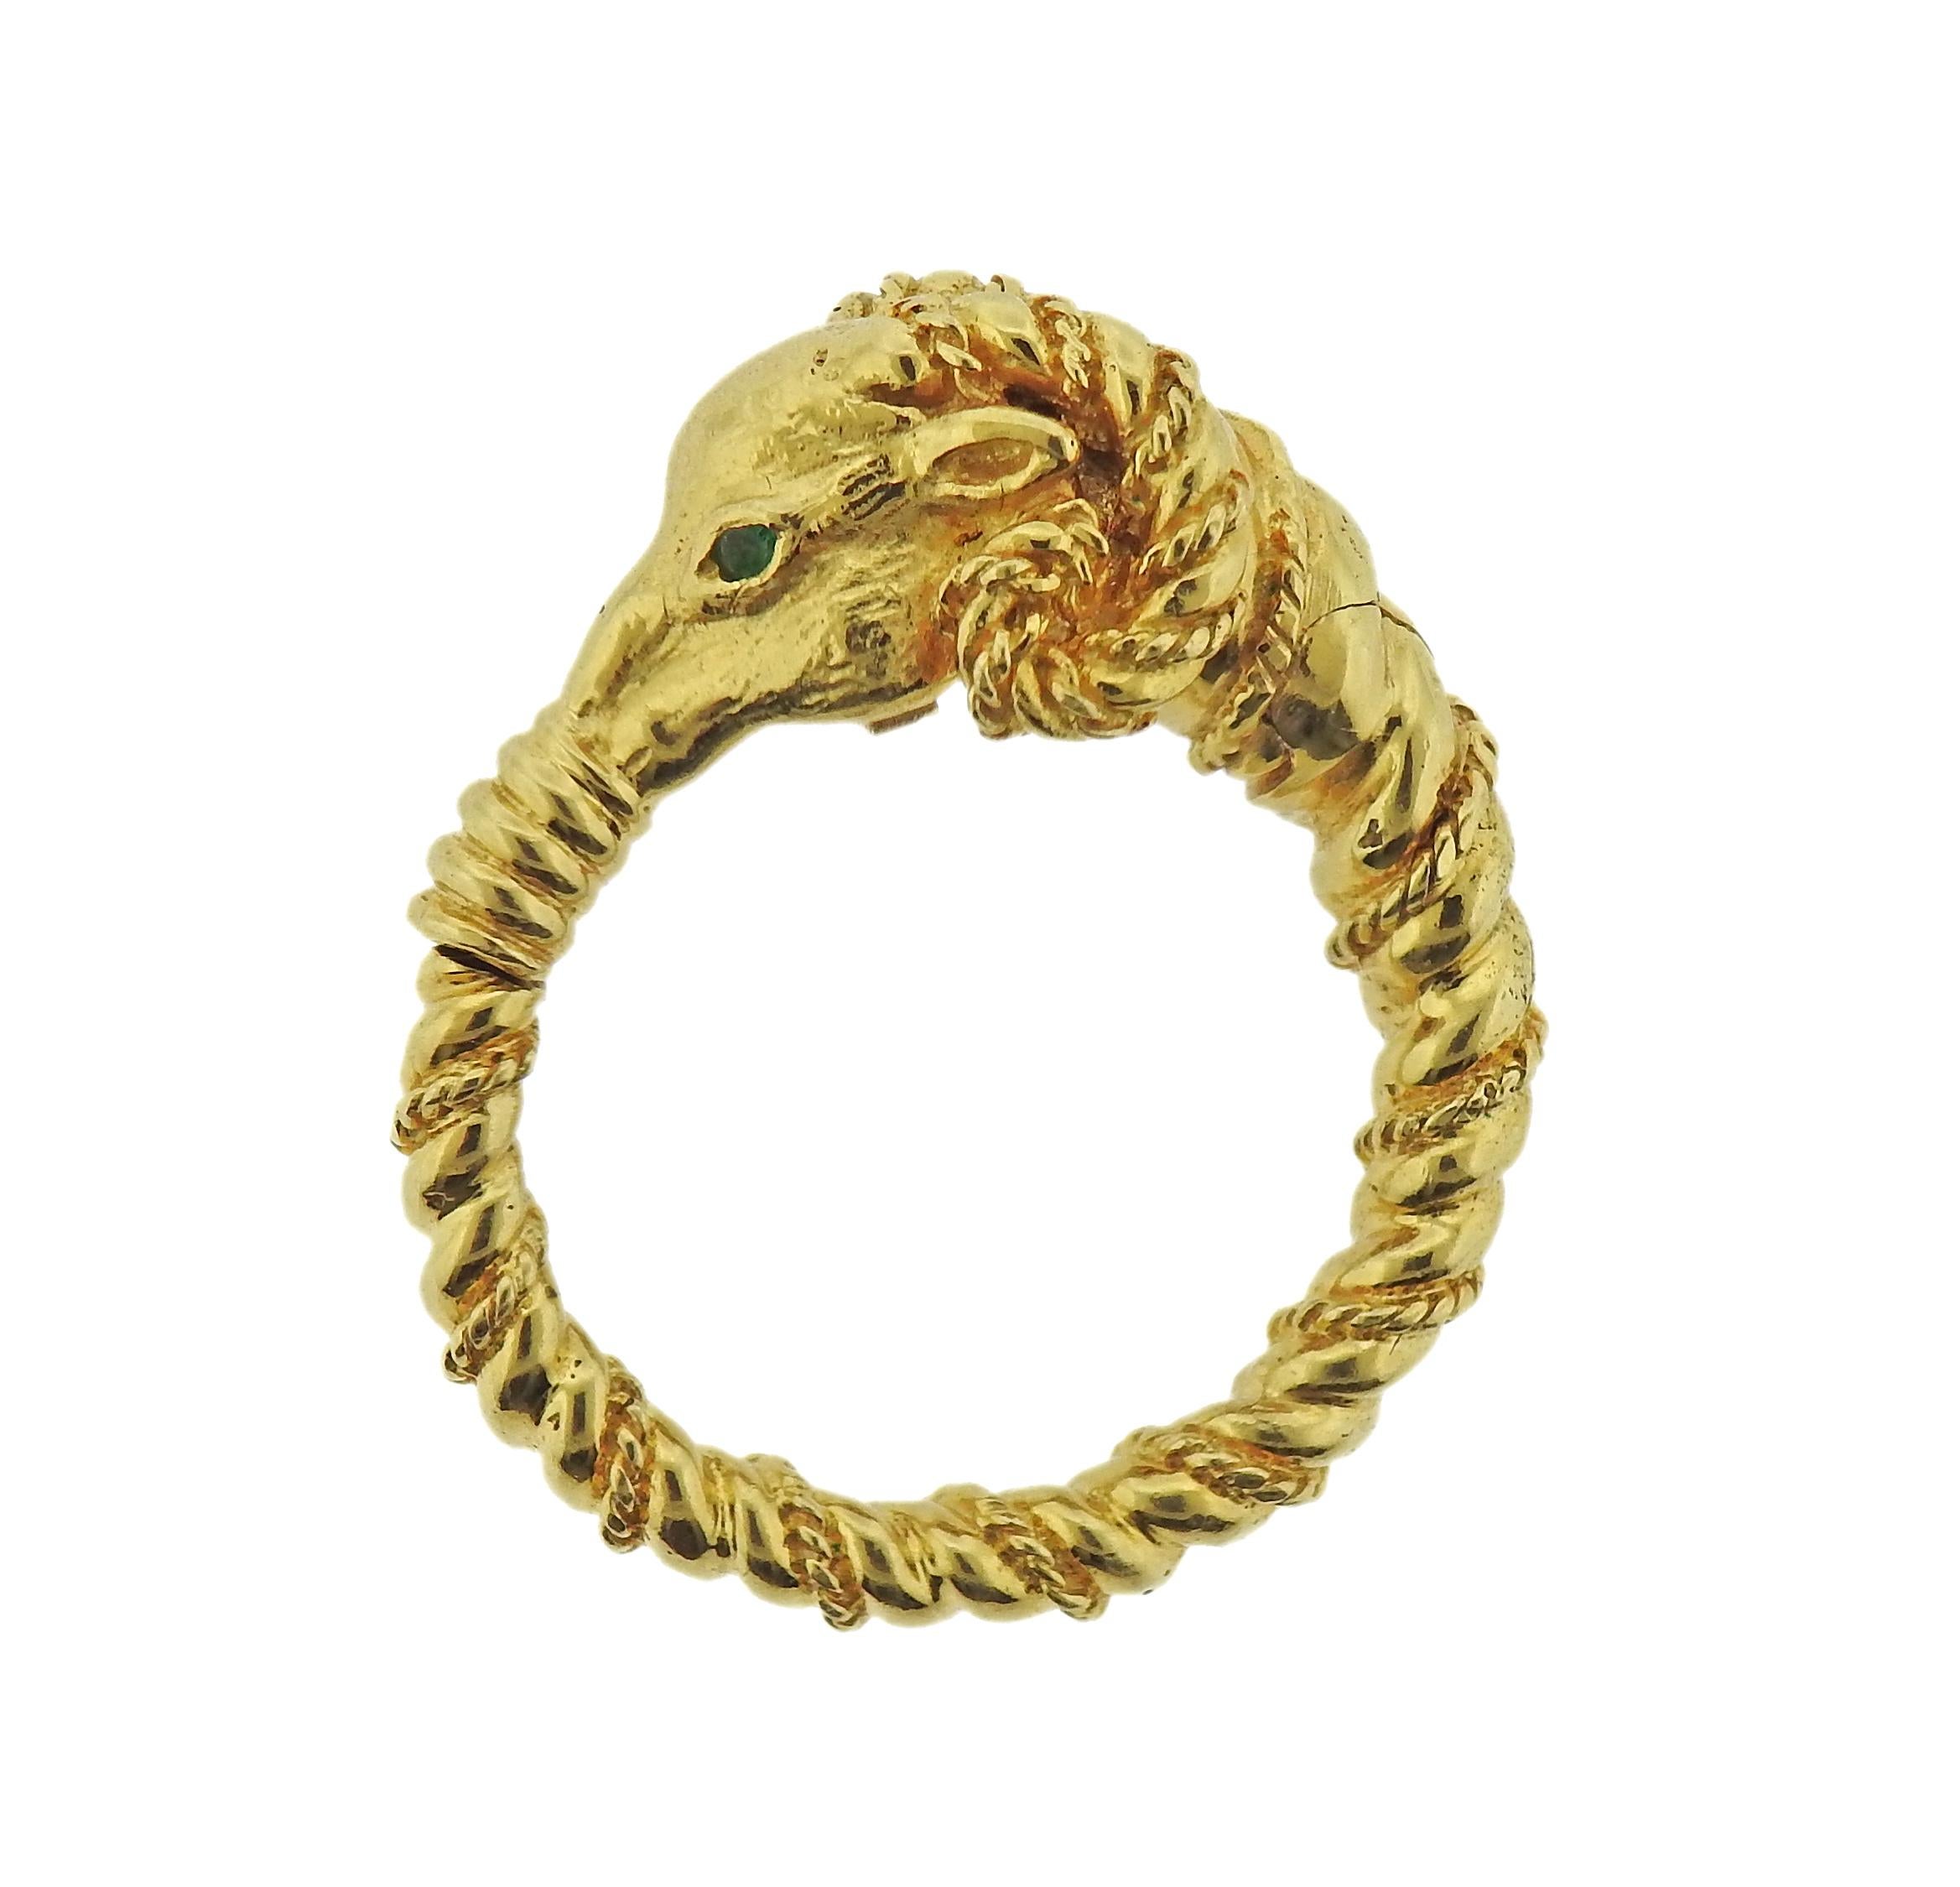 18k yellow gold ram's head ring by Tiffany & Co, with emerald eyes. Ring size - 10.5, ring top (head) is 15mm x 13mm. Marked: Tiffany 18k. Weight - 23.3 grams.